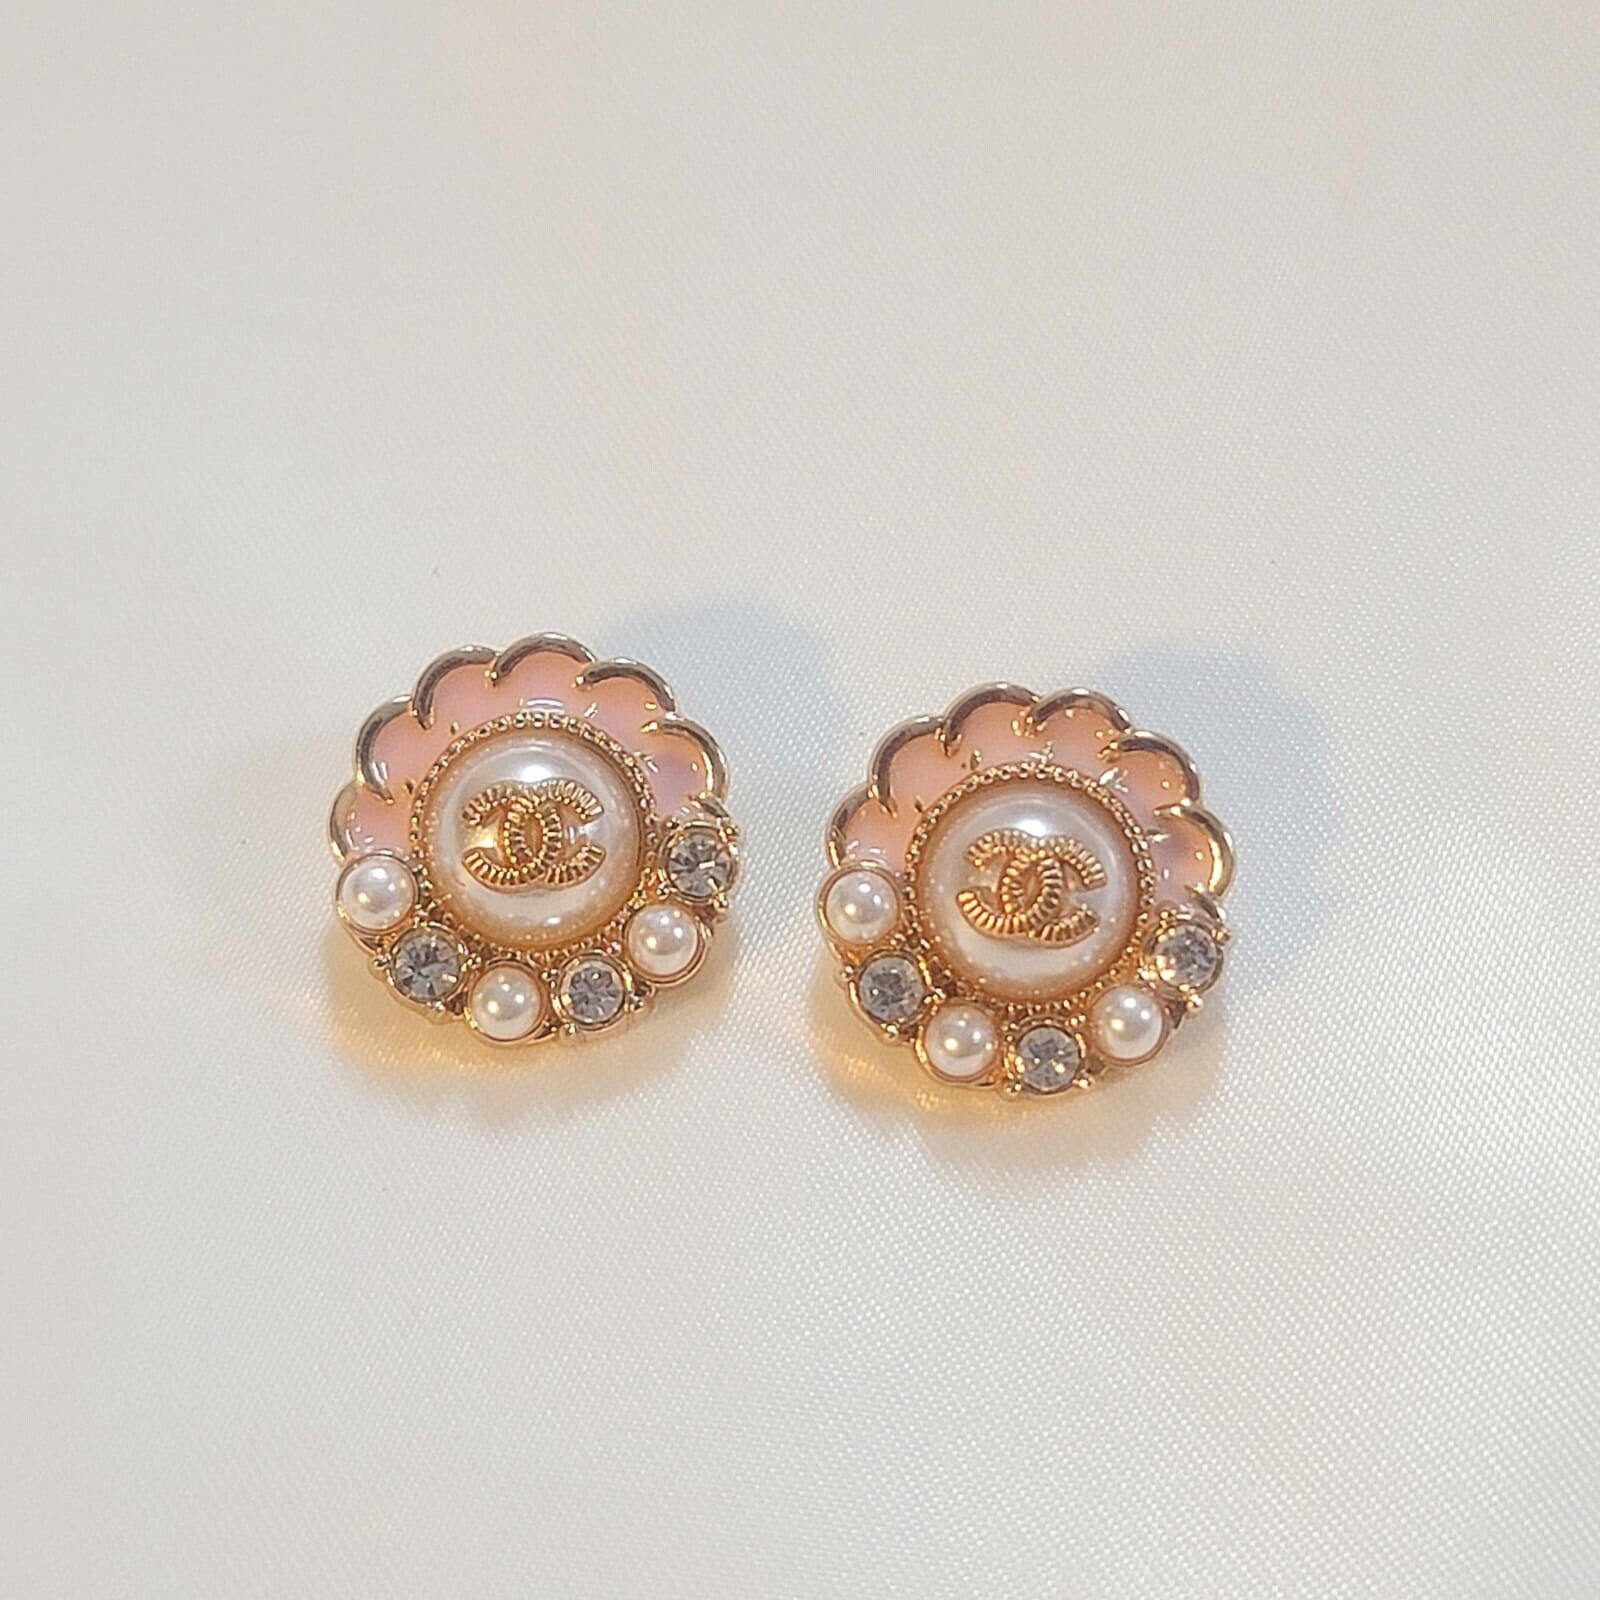 2pc Set 18mm Chanel Buttons